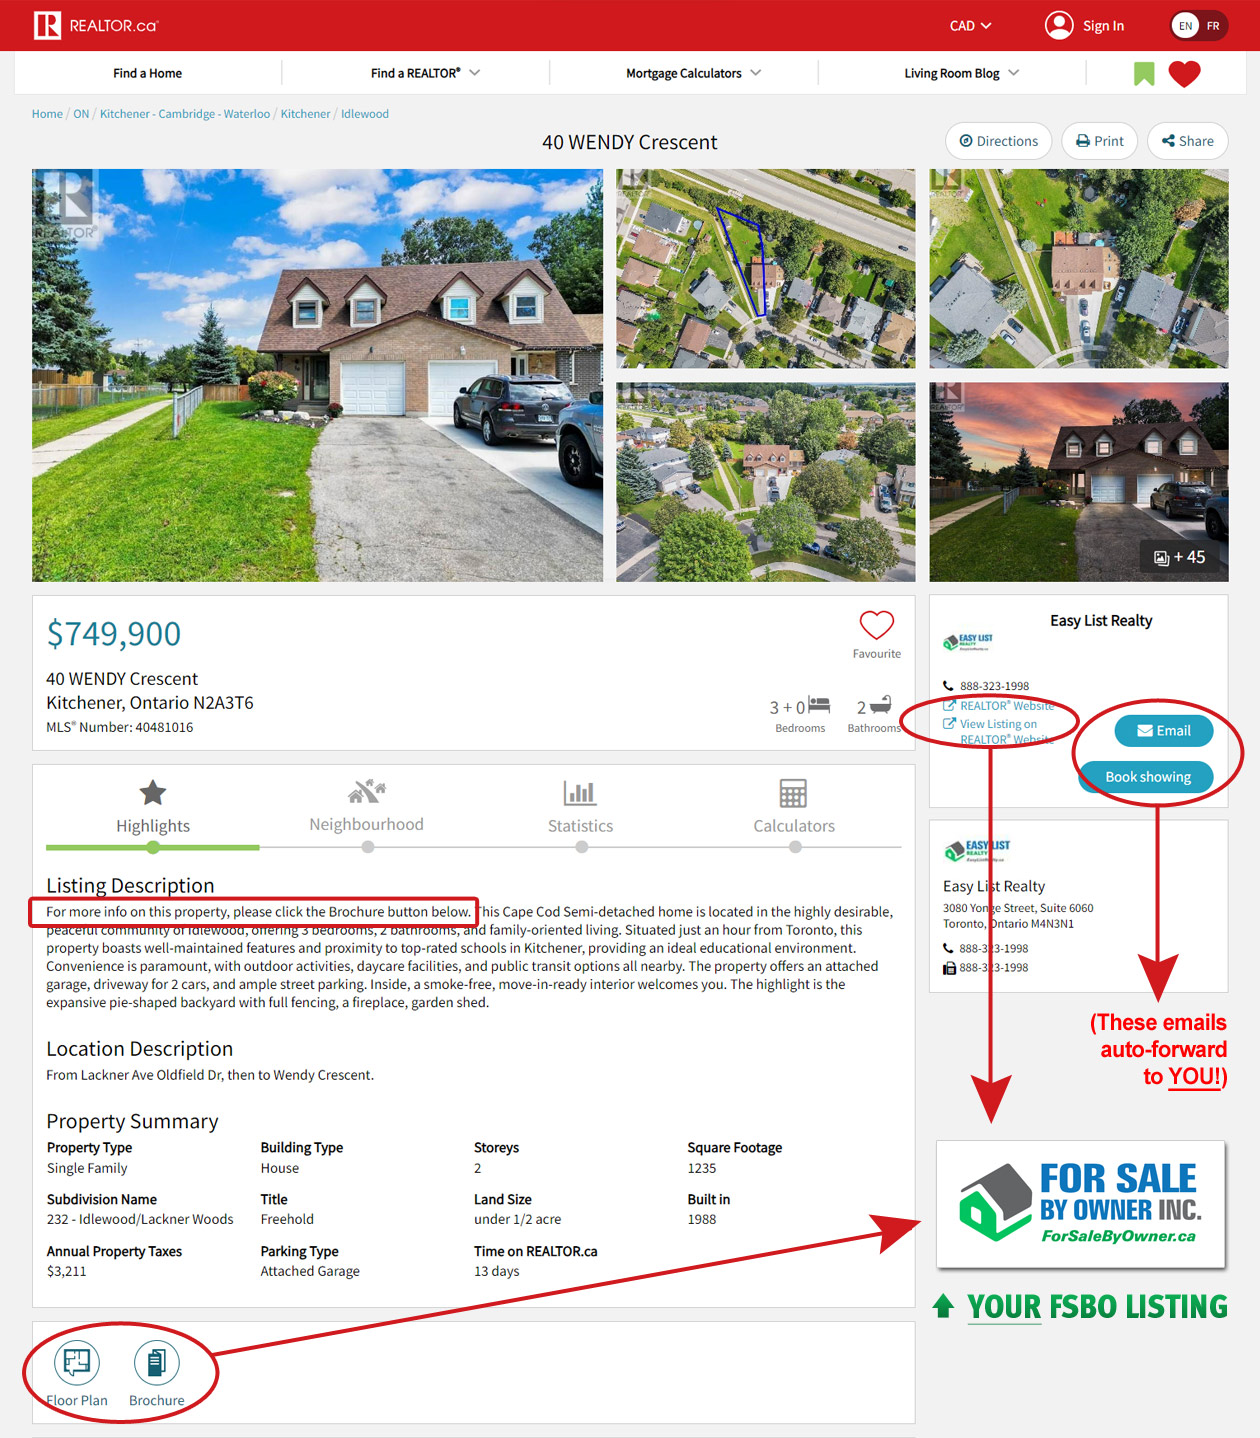 Diagram of how REALTOR.ca links to FSBO listing